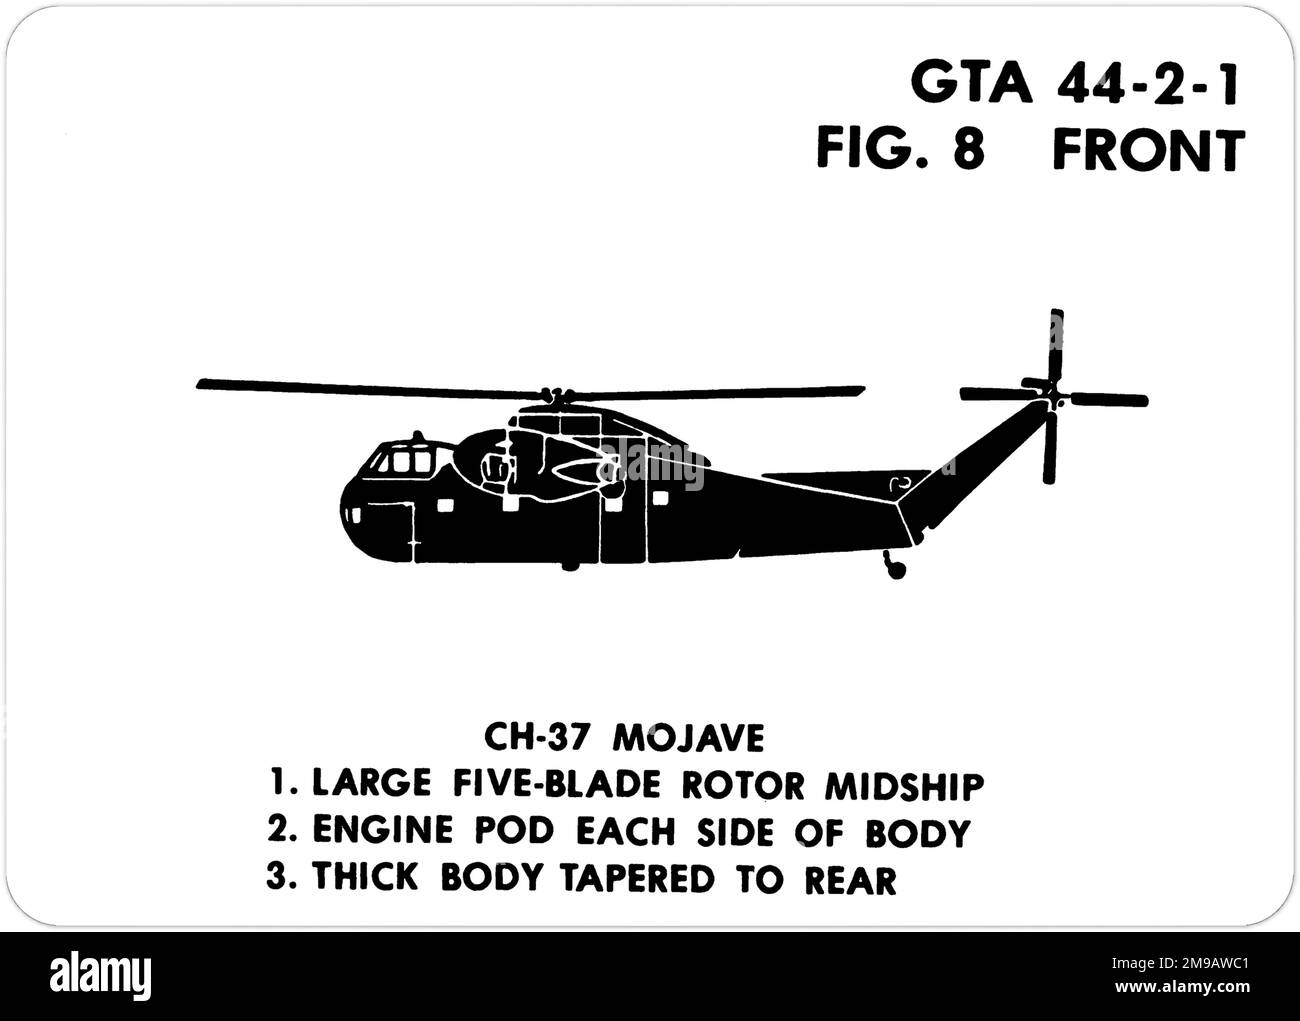 Sikorsky CH-37 Mojave (Sikorsky S-56) . This is one of the series of Graphics Training Aids (GTA) used by the United States Army to train their personnel to recognize friendly and hostile aircraft. This particular set, GTA 44-2-1, was issued in July1977. The set features aircraft from: Canada, Italy, United Kingdom, United States, and the USSR. Stock Photo